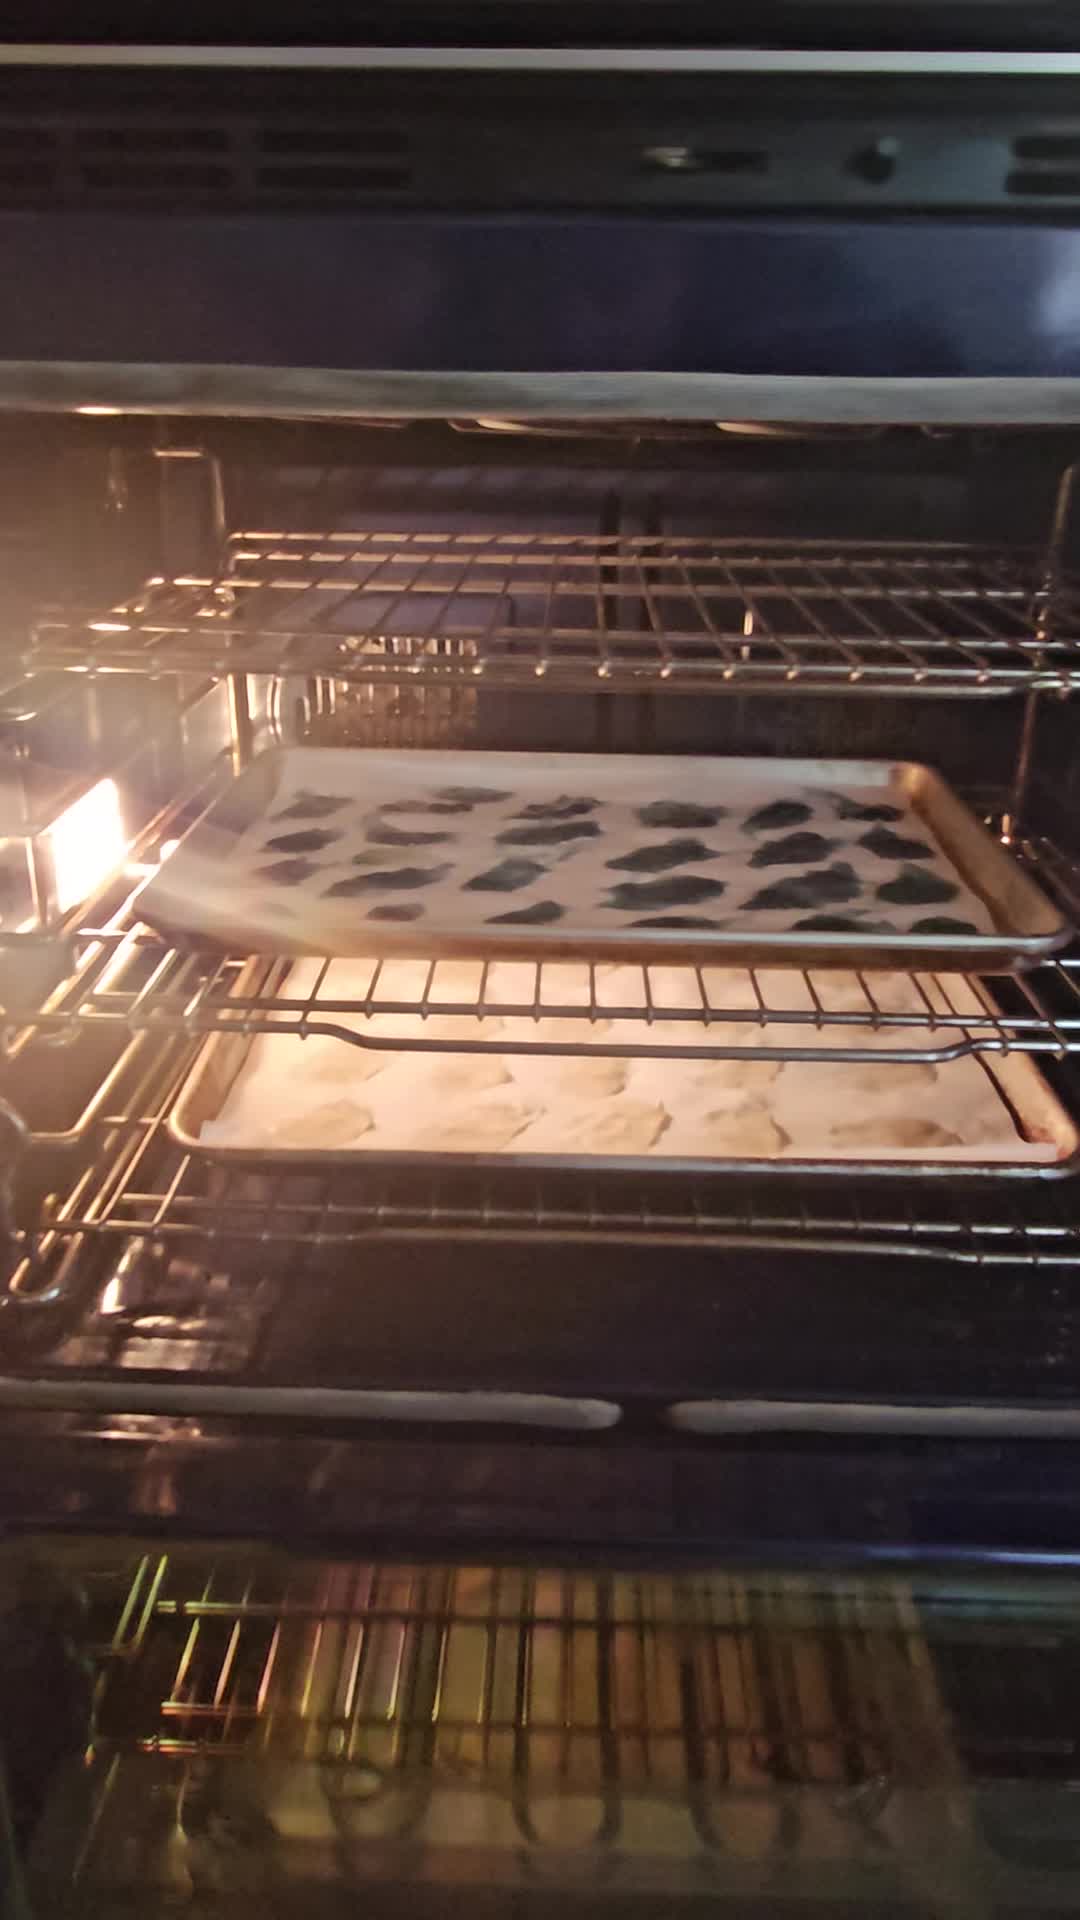 Glass Potato Chips in the oven